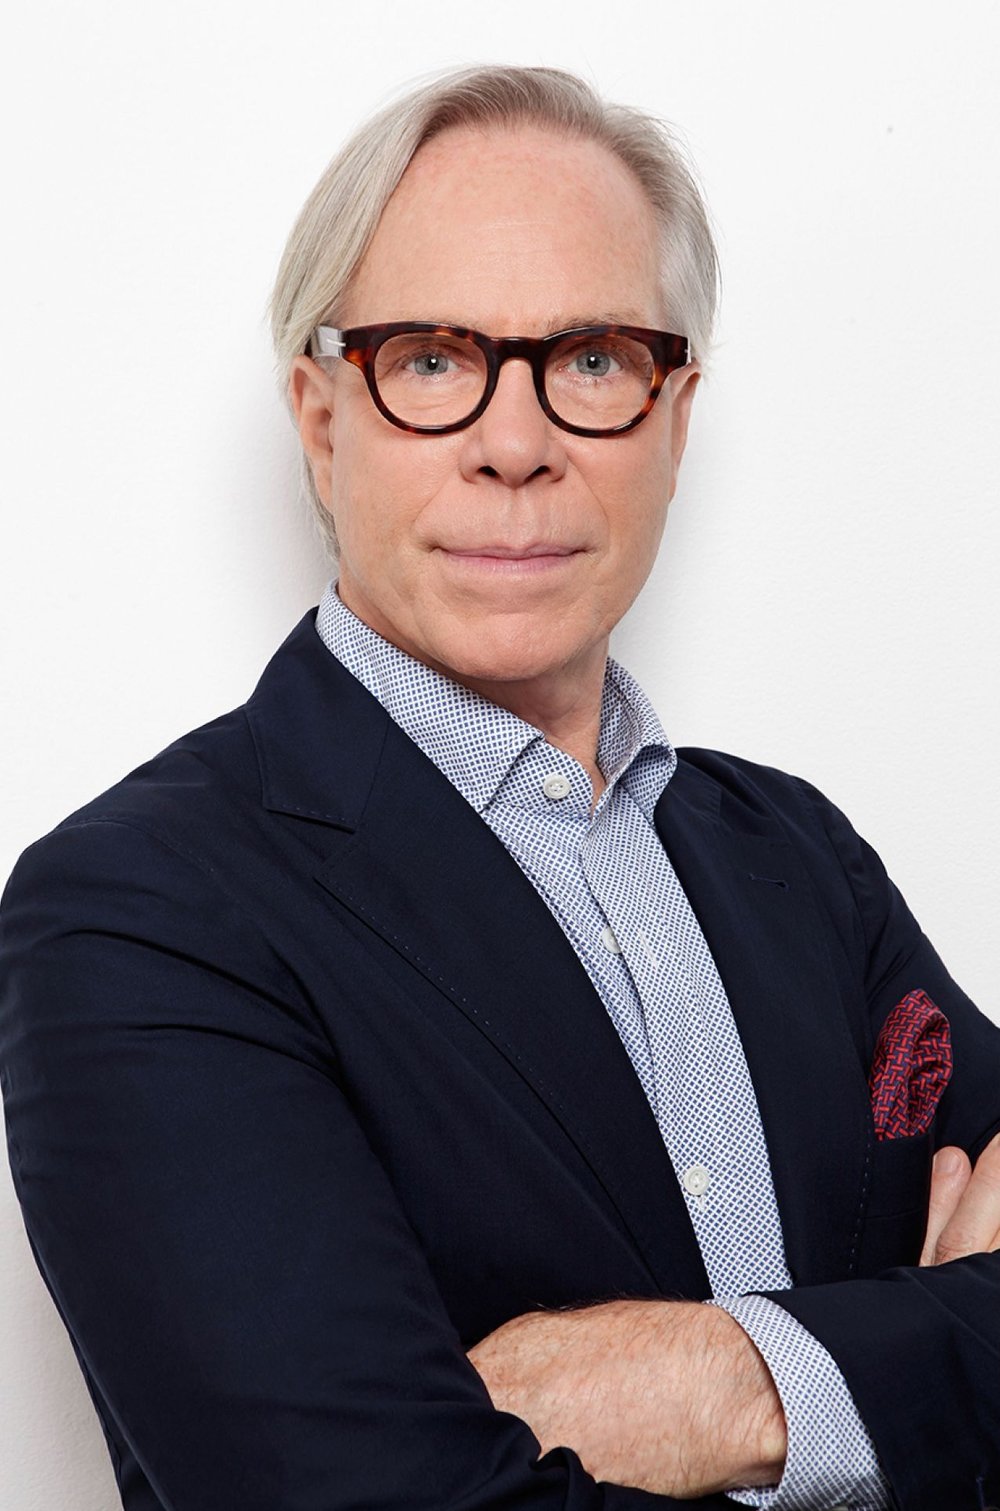 Style Interview: Hilfiger is the American — David RS Taylor